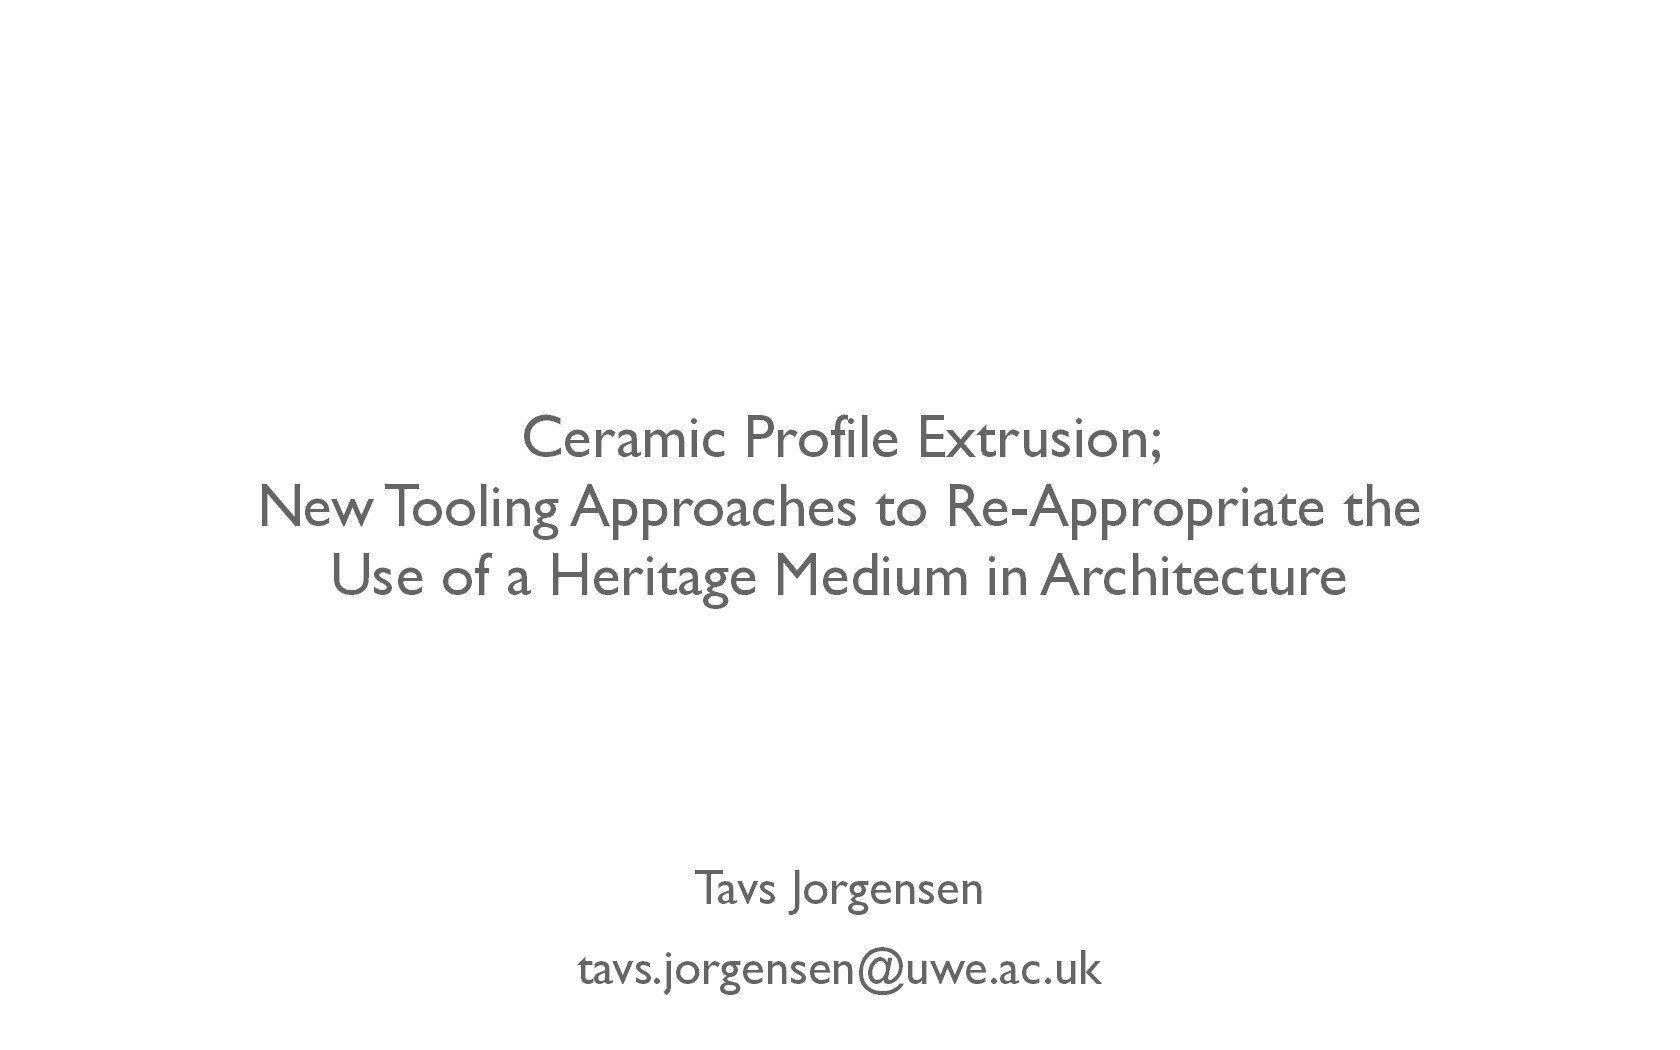 Ceramic profile extrusion: New tooling approaches to re-appropriate the use of a heritage medium in architecture Thumbnail